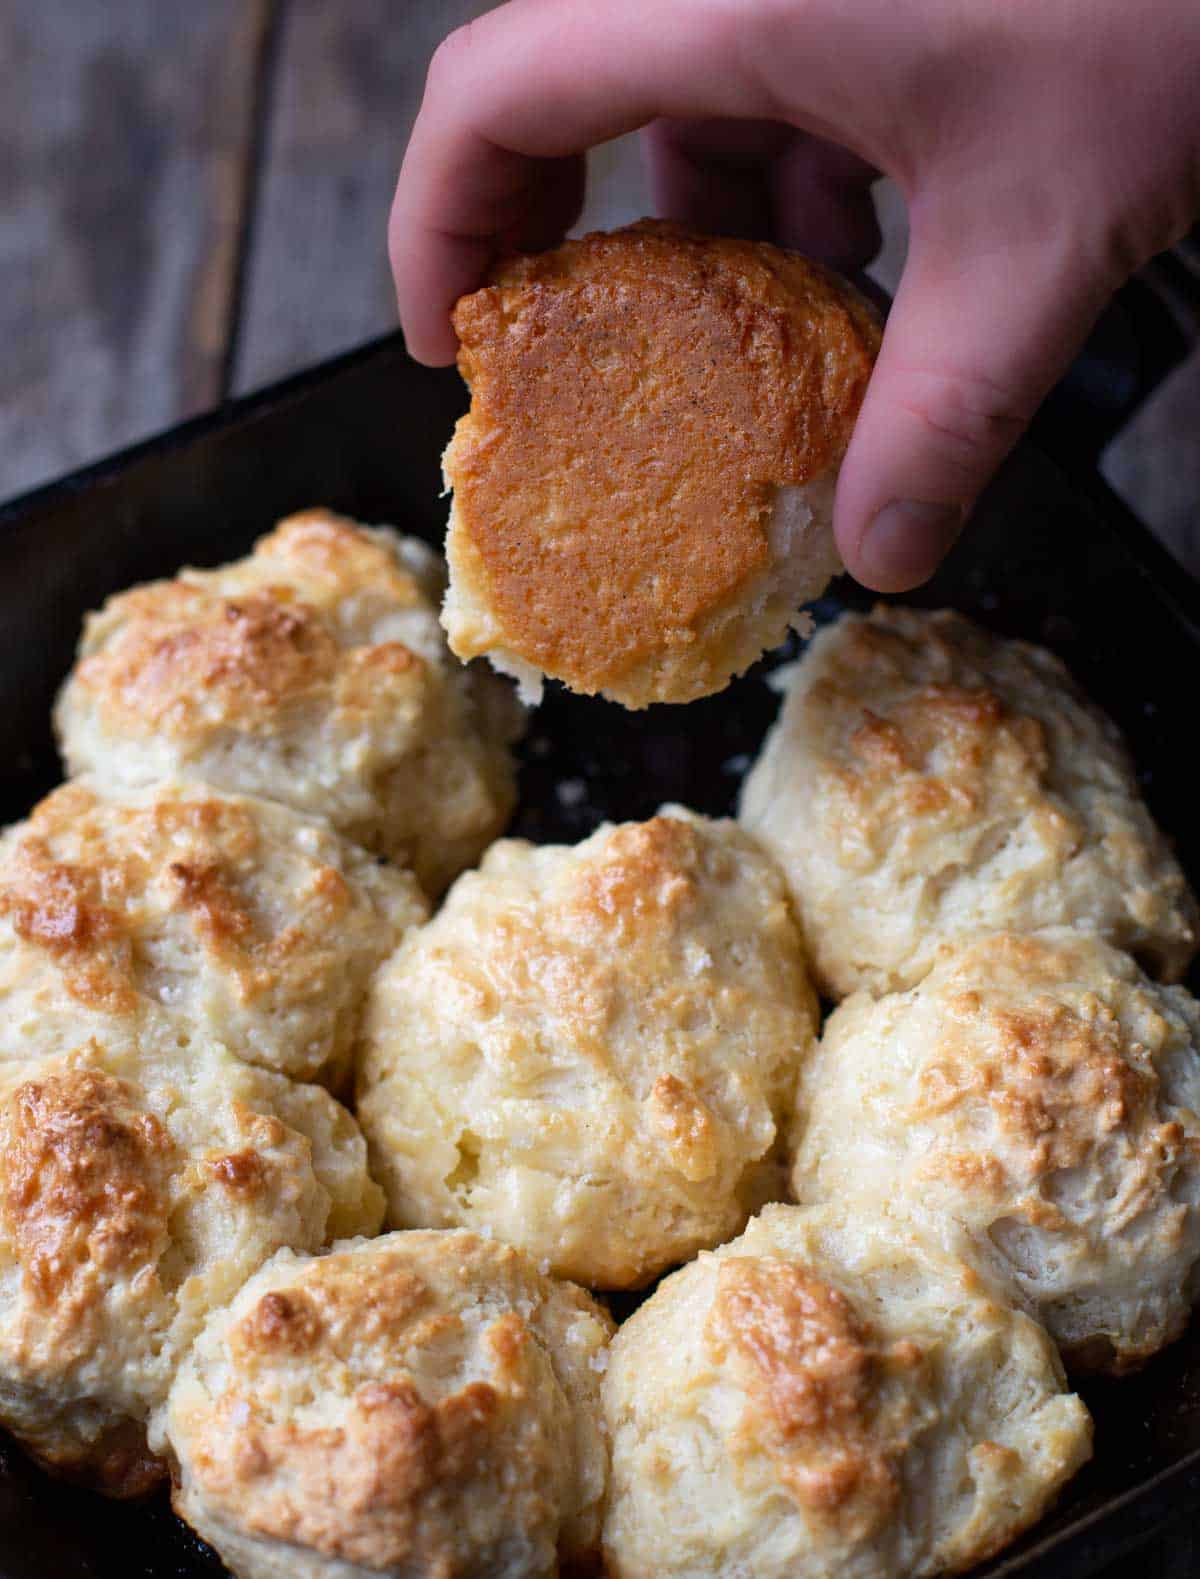 The underside of cast iron drop biscuits showing the golden crust.